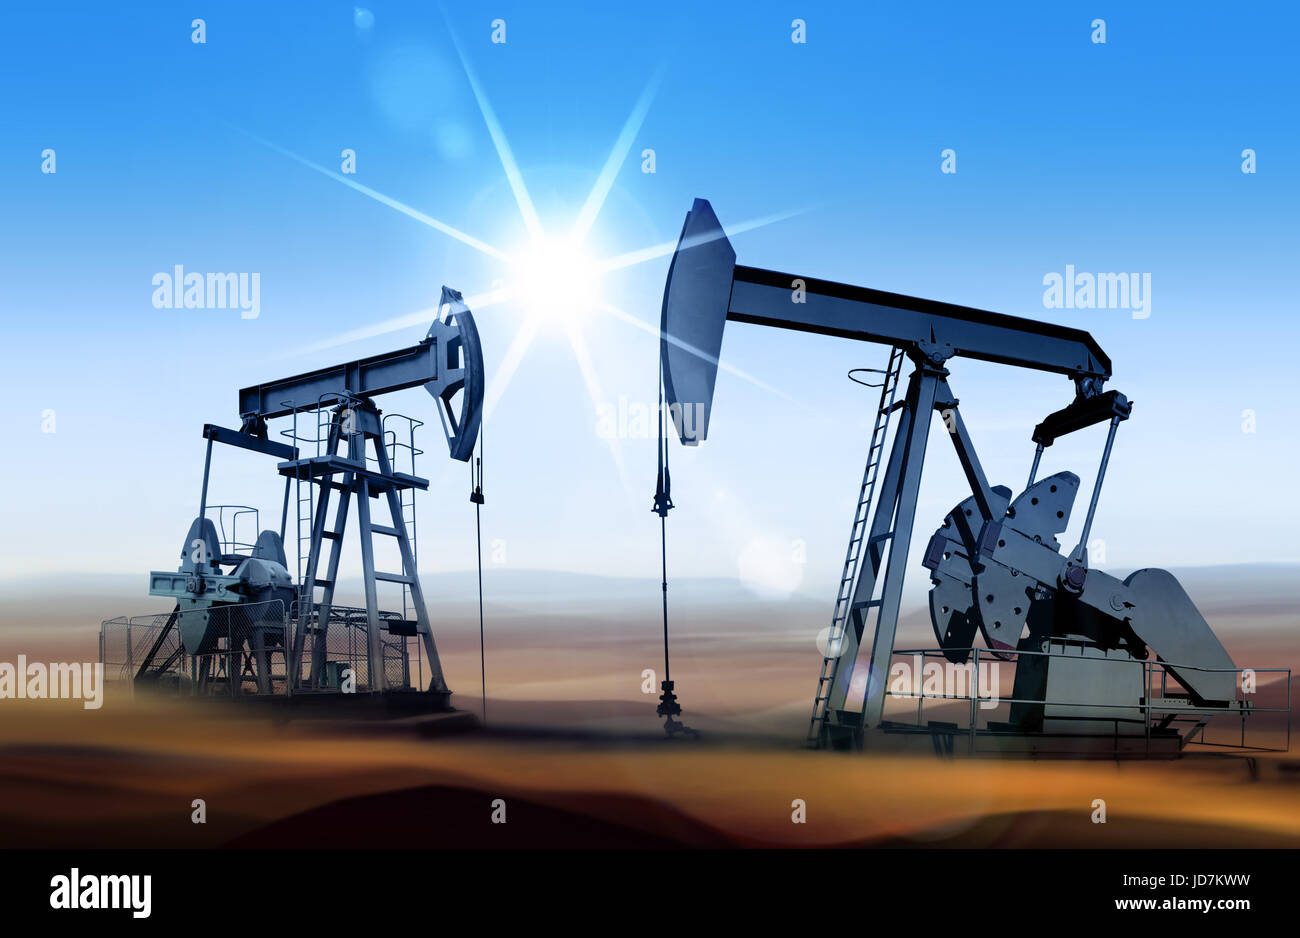 Working oil pumps in desert place of Middle East Stock Photo